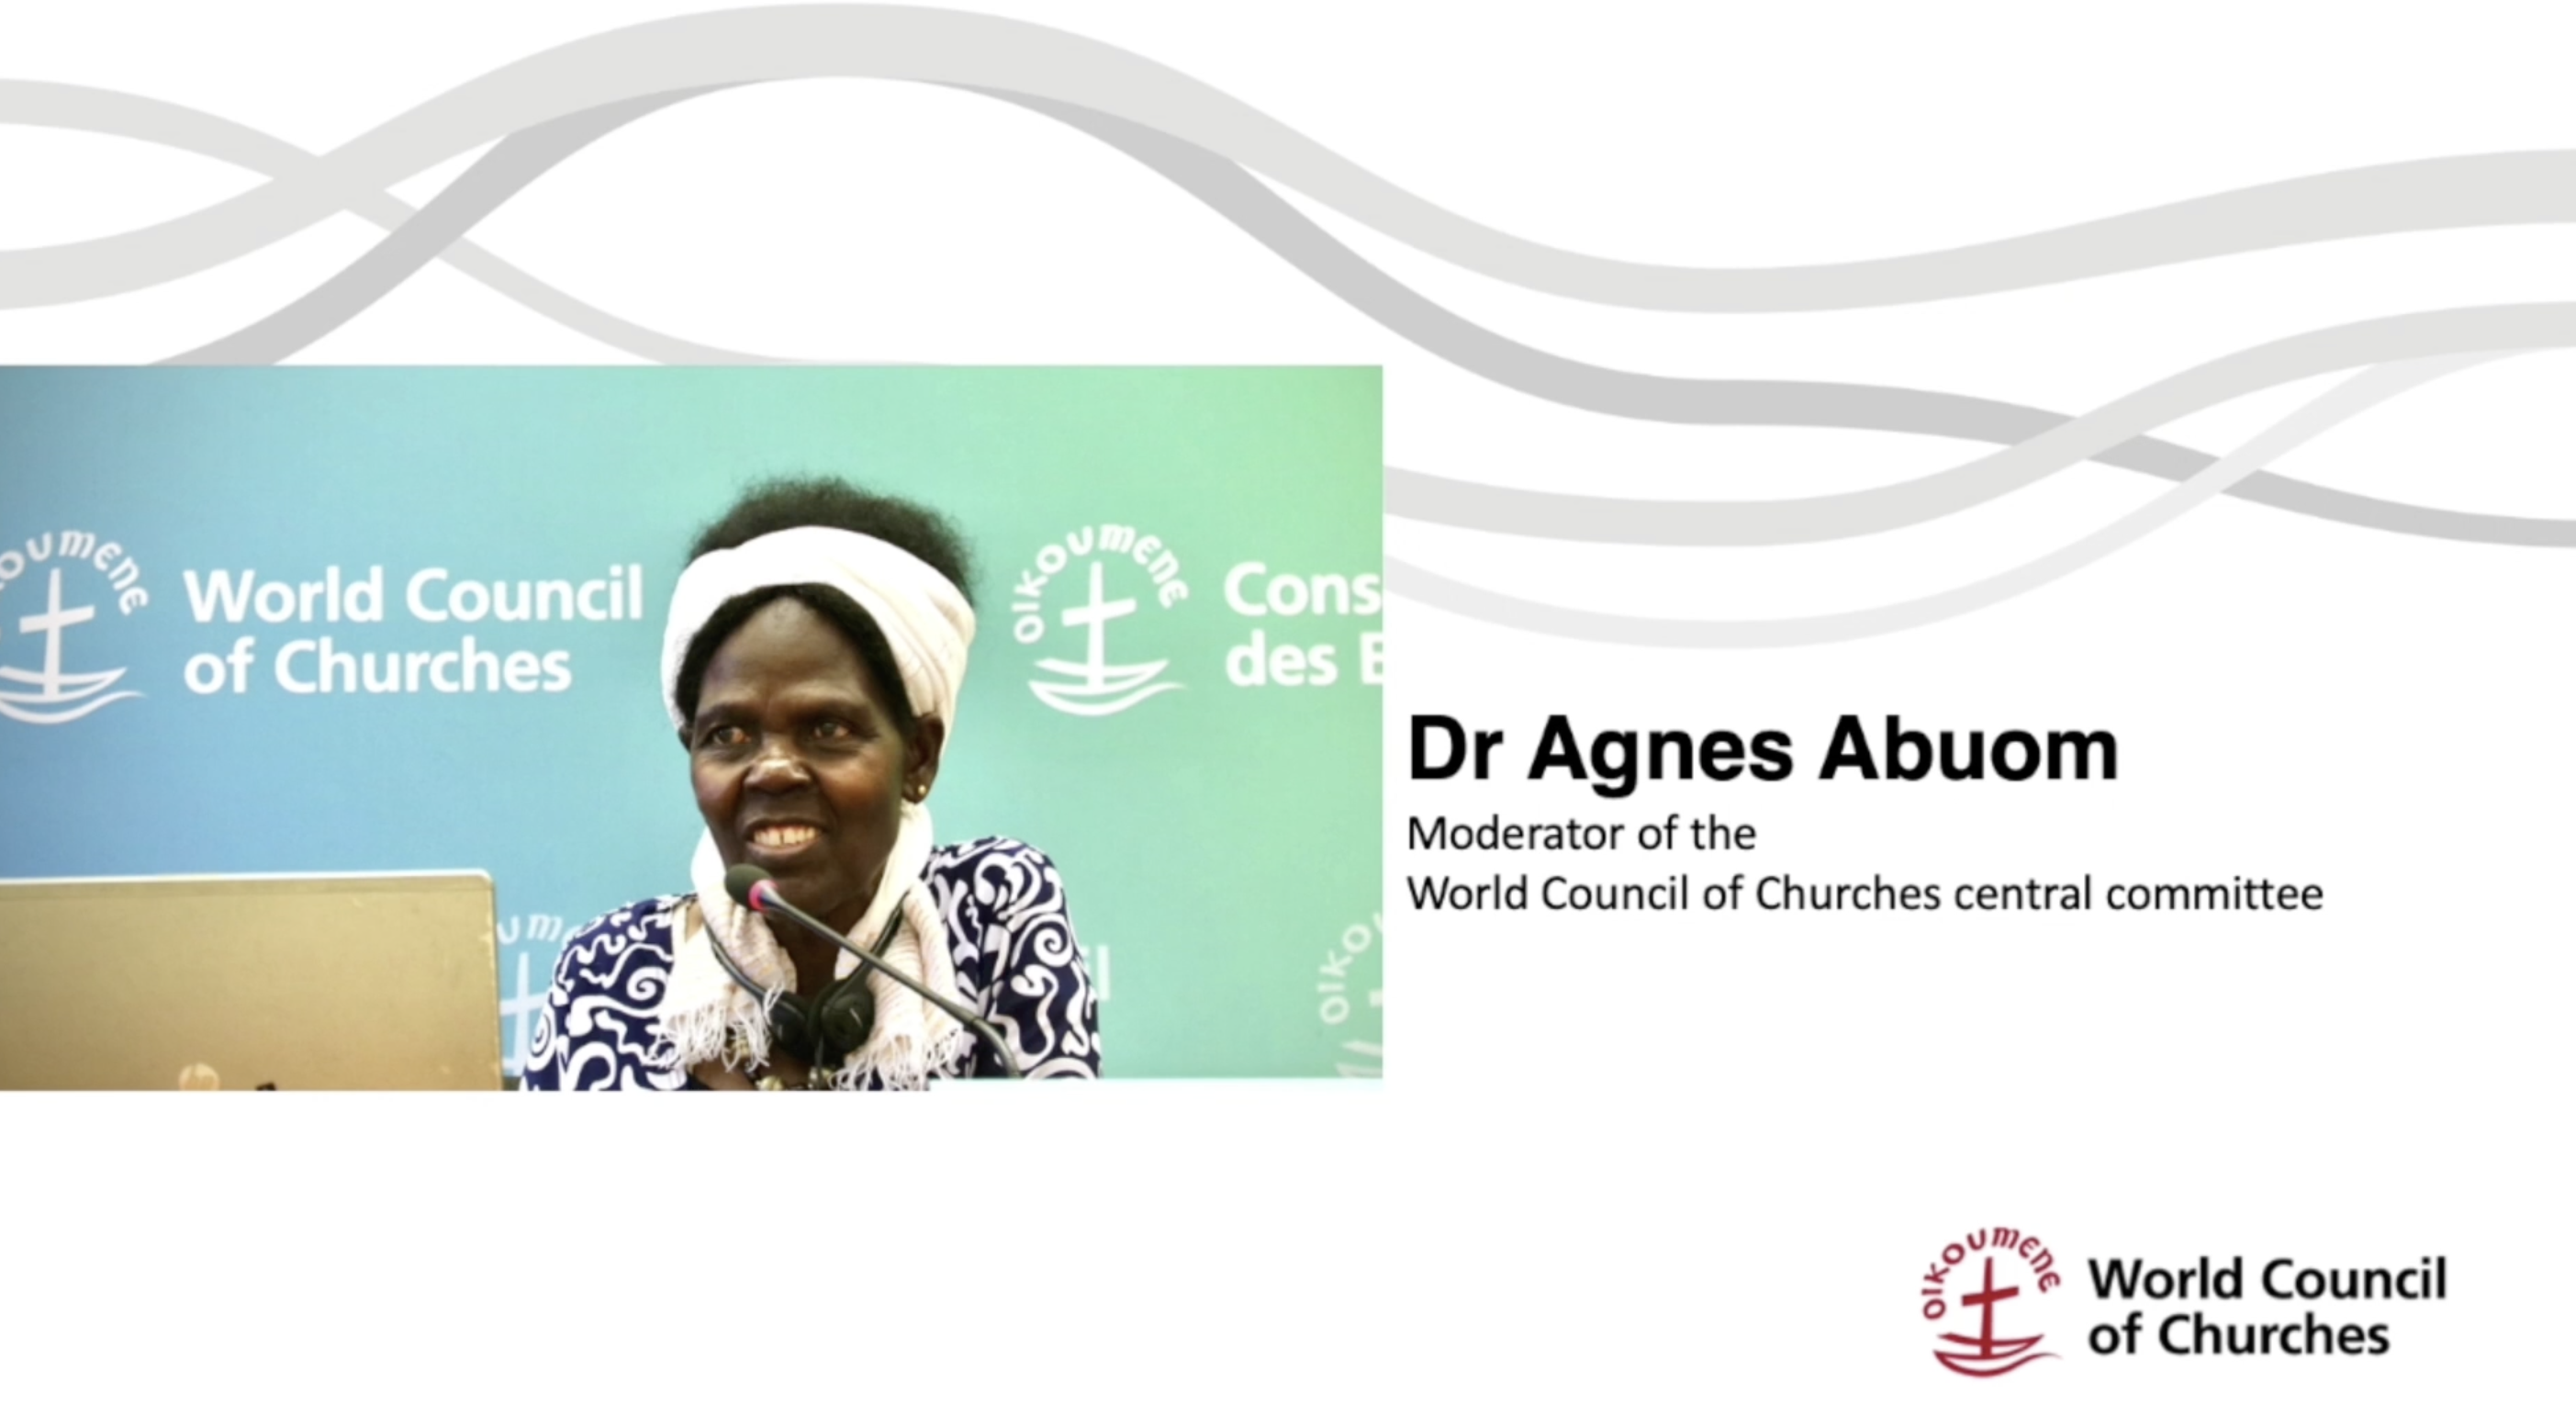 H.E. Amb. Marie-Therese Pictet-Althann participated in the Generations Dialogue of the Conference of the World  Council of Religious Leaders on Faith and Diplomacy